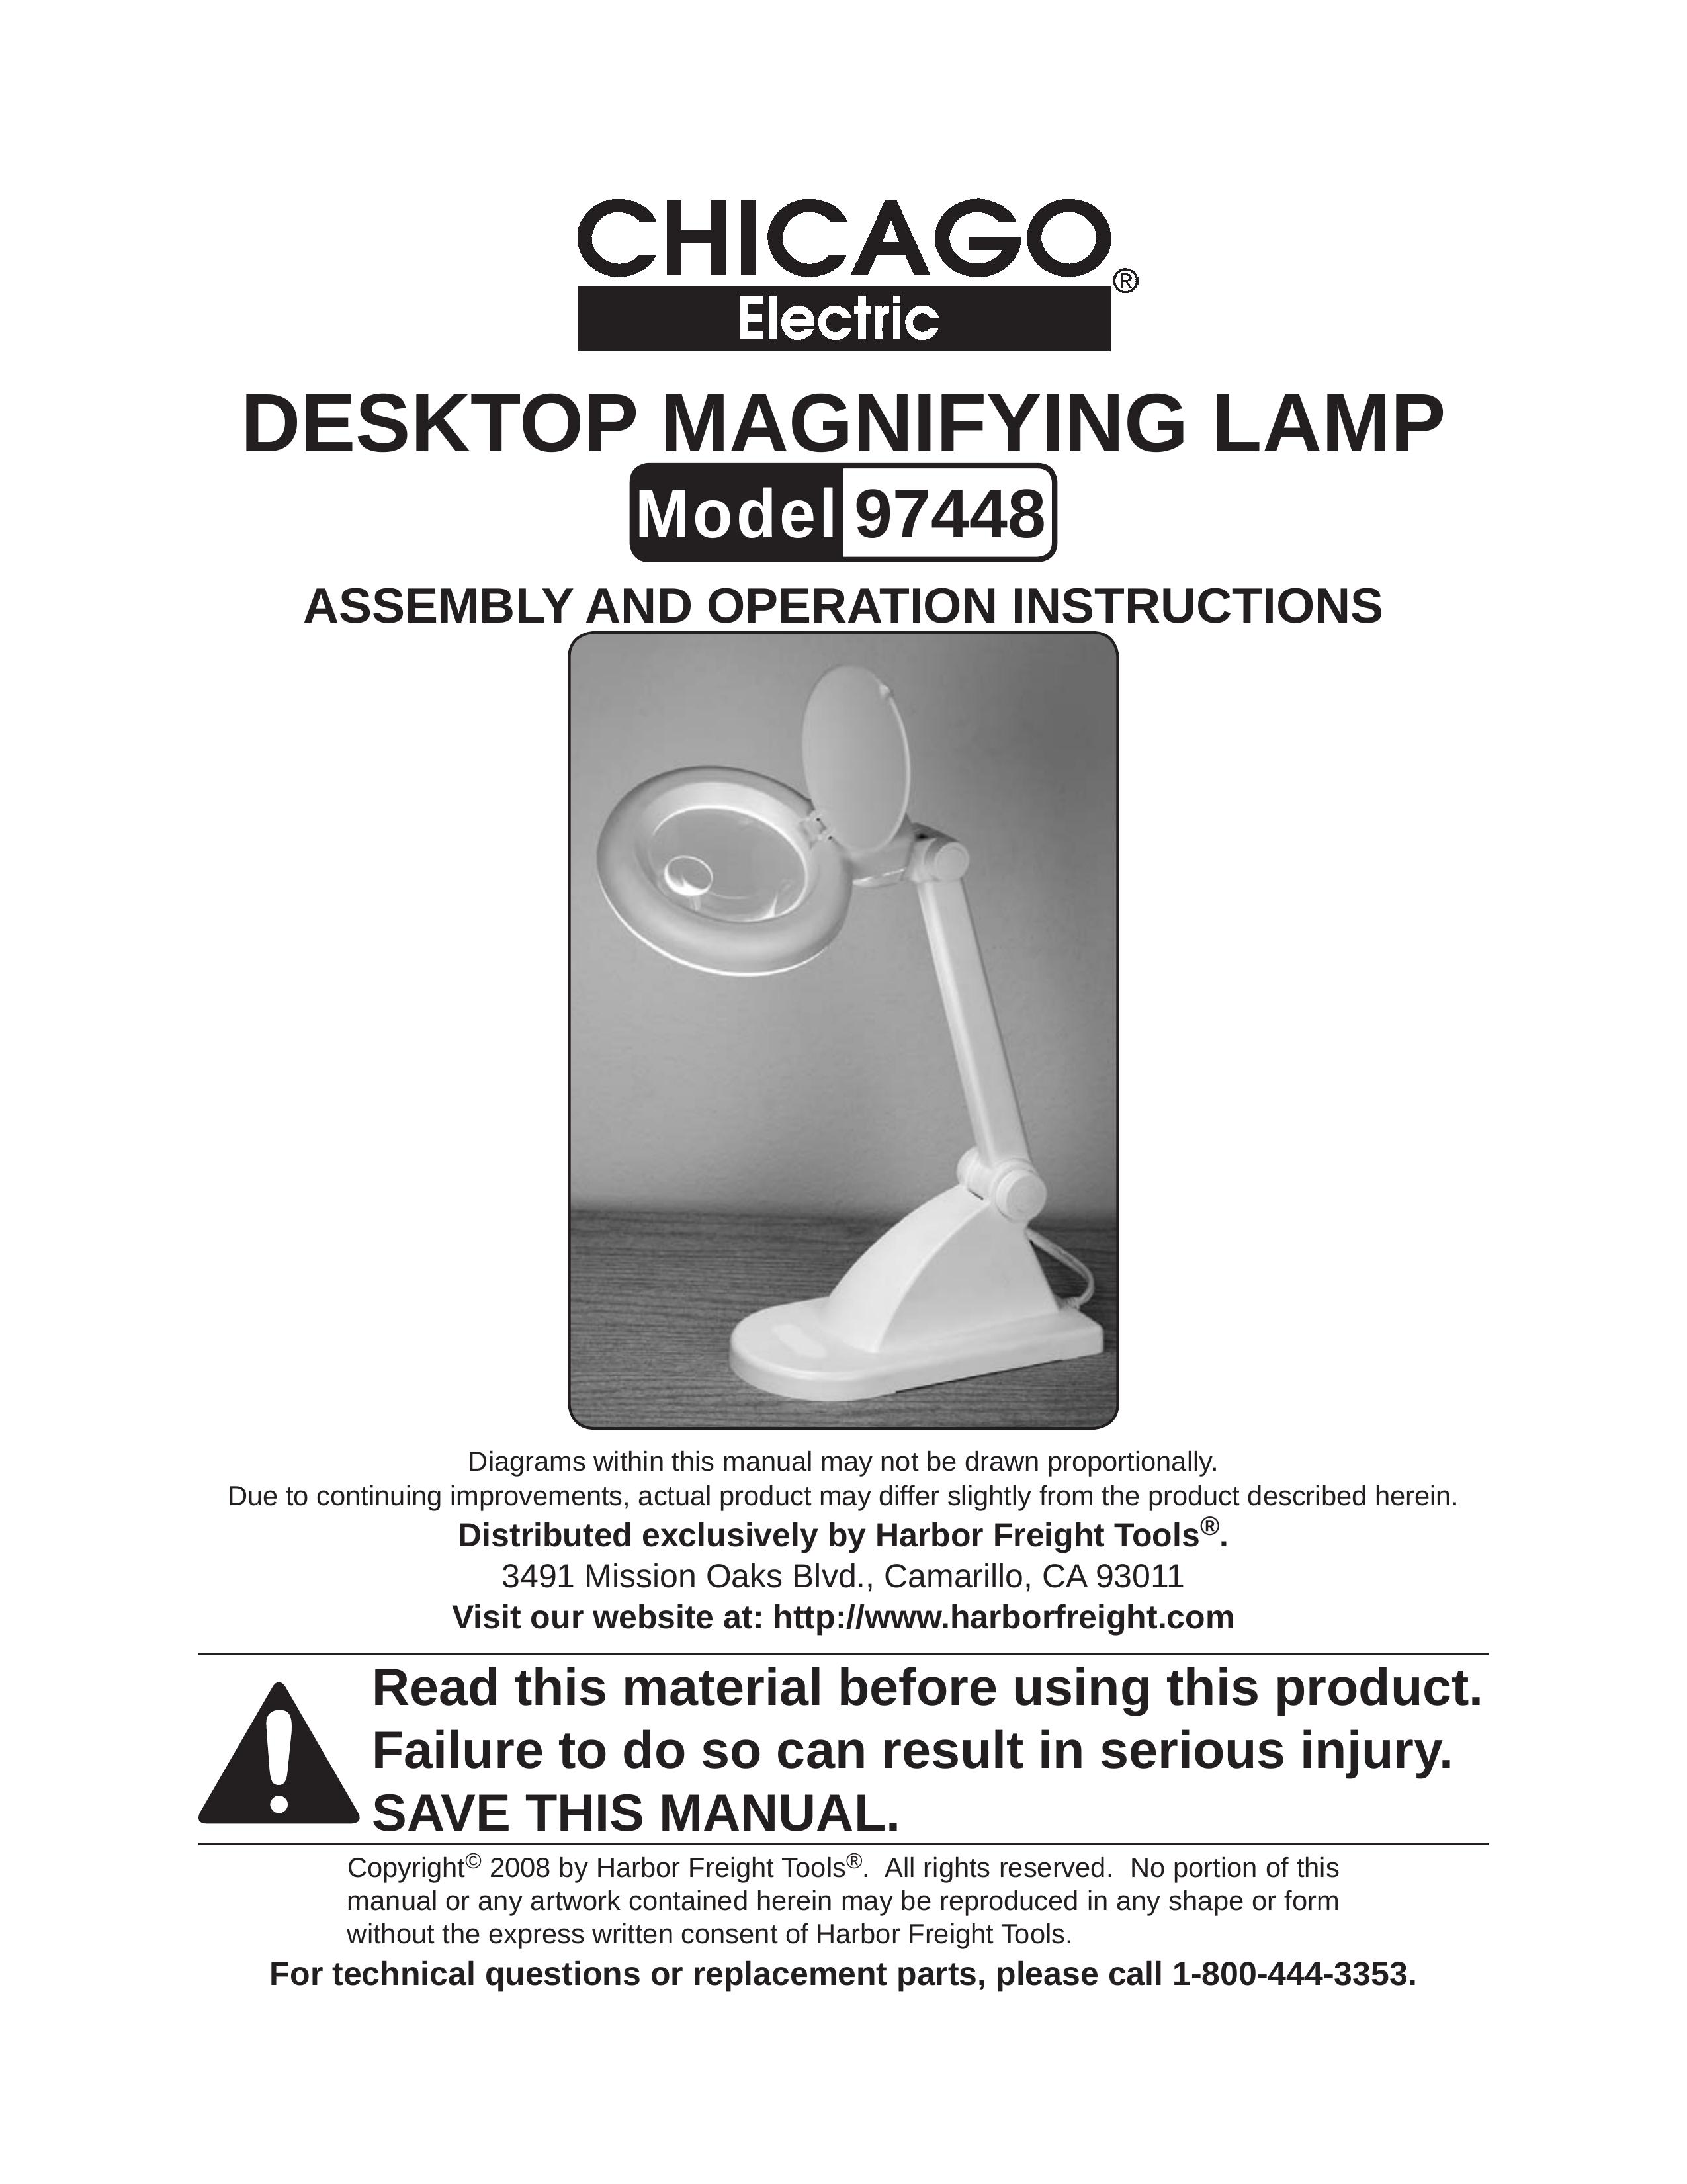 Chicago Electric 97448 Microscope & Magnifier User Manual